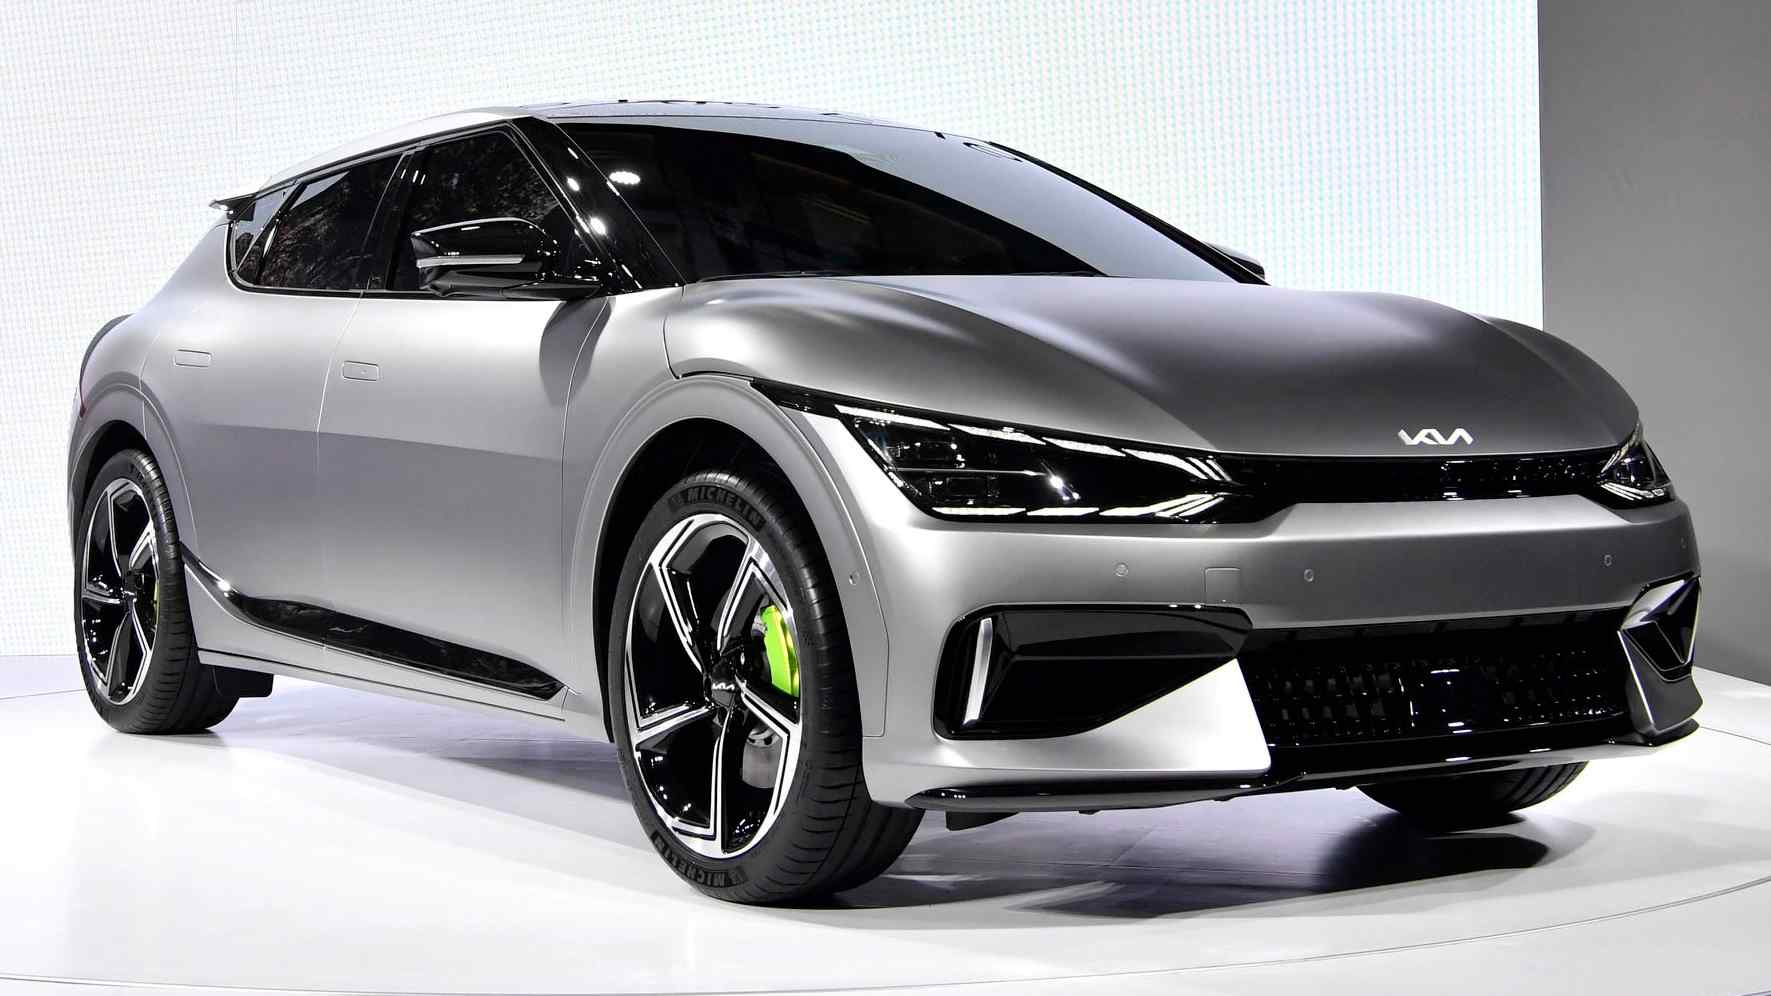  Kia EV6 GT electric crossover packs 585 hp, 0-100 kph time of 3.5 seconds and 260 kph top speed